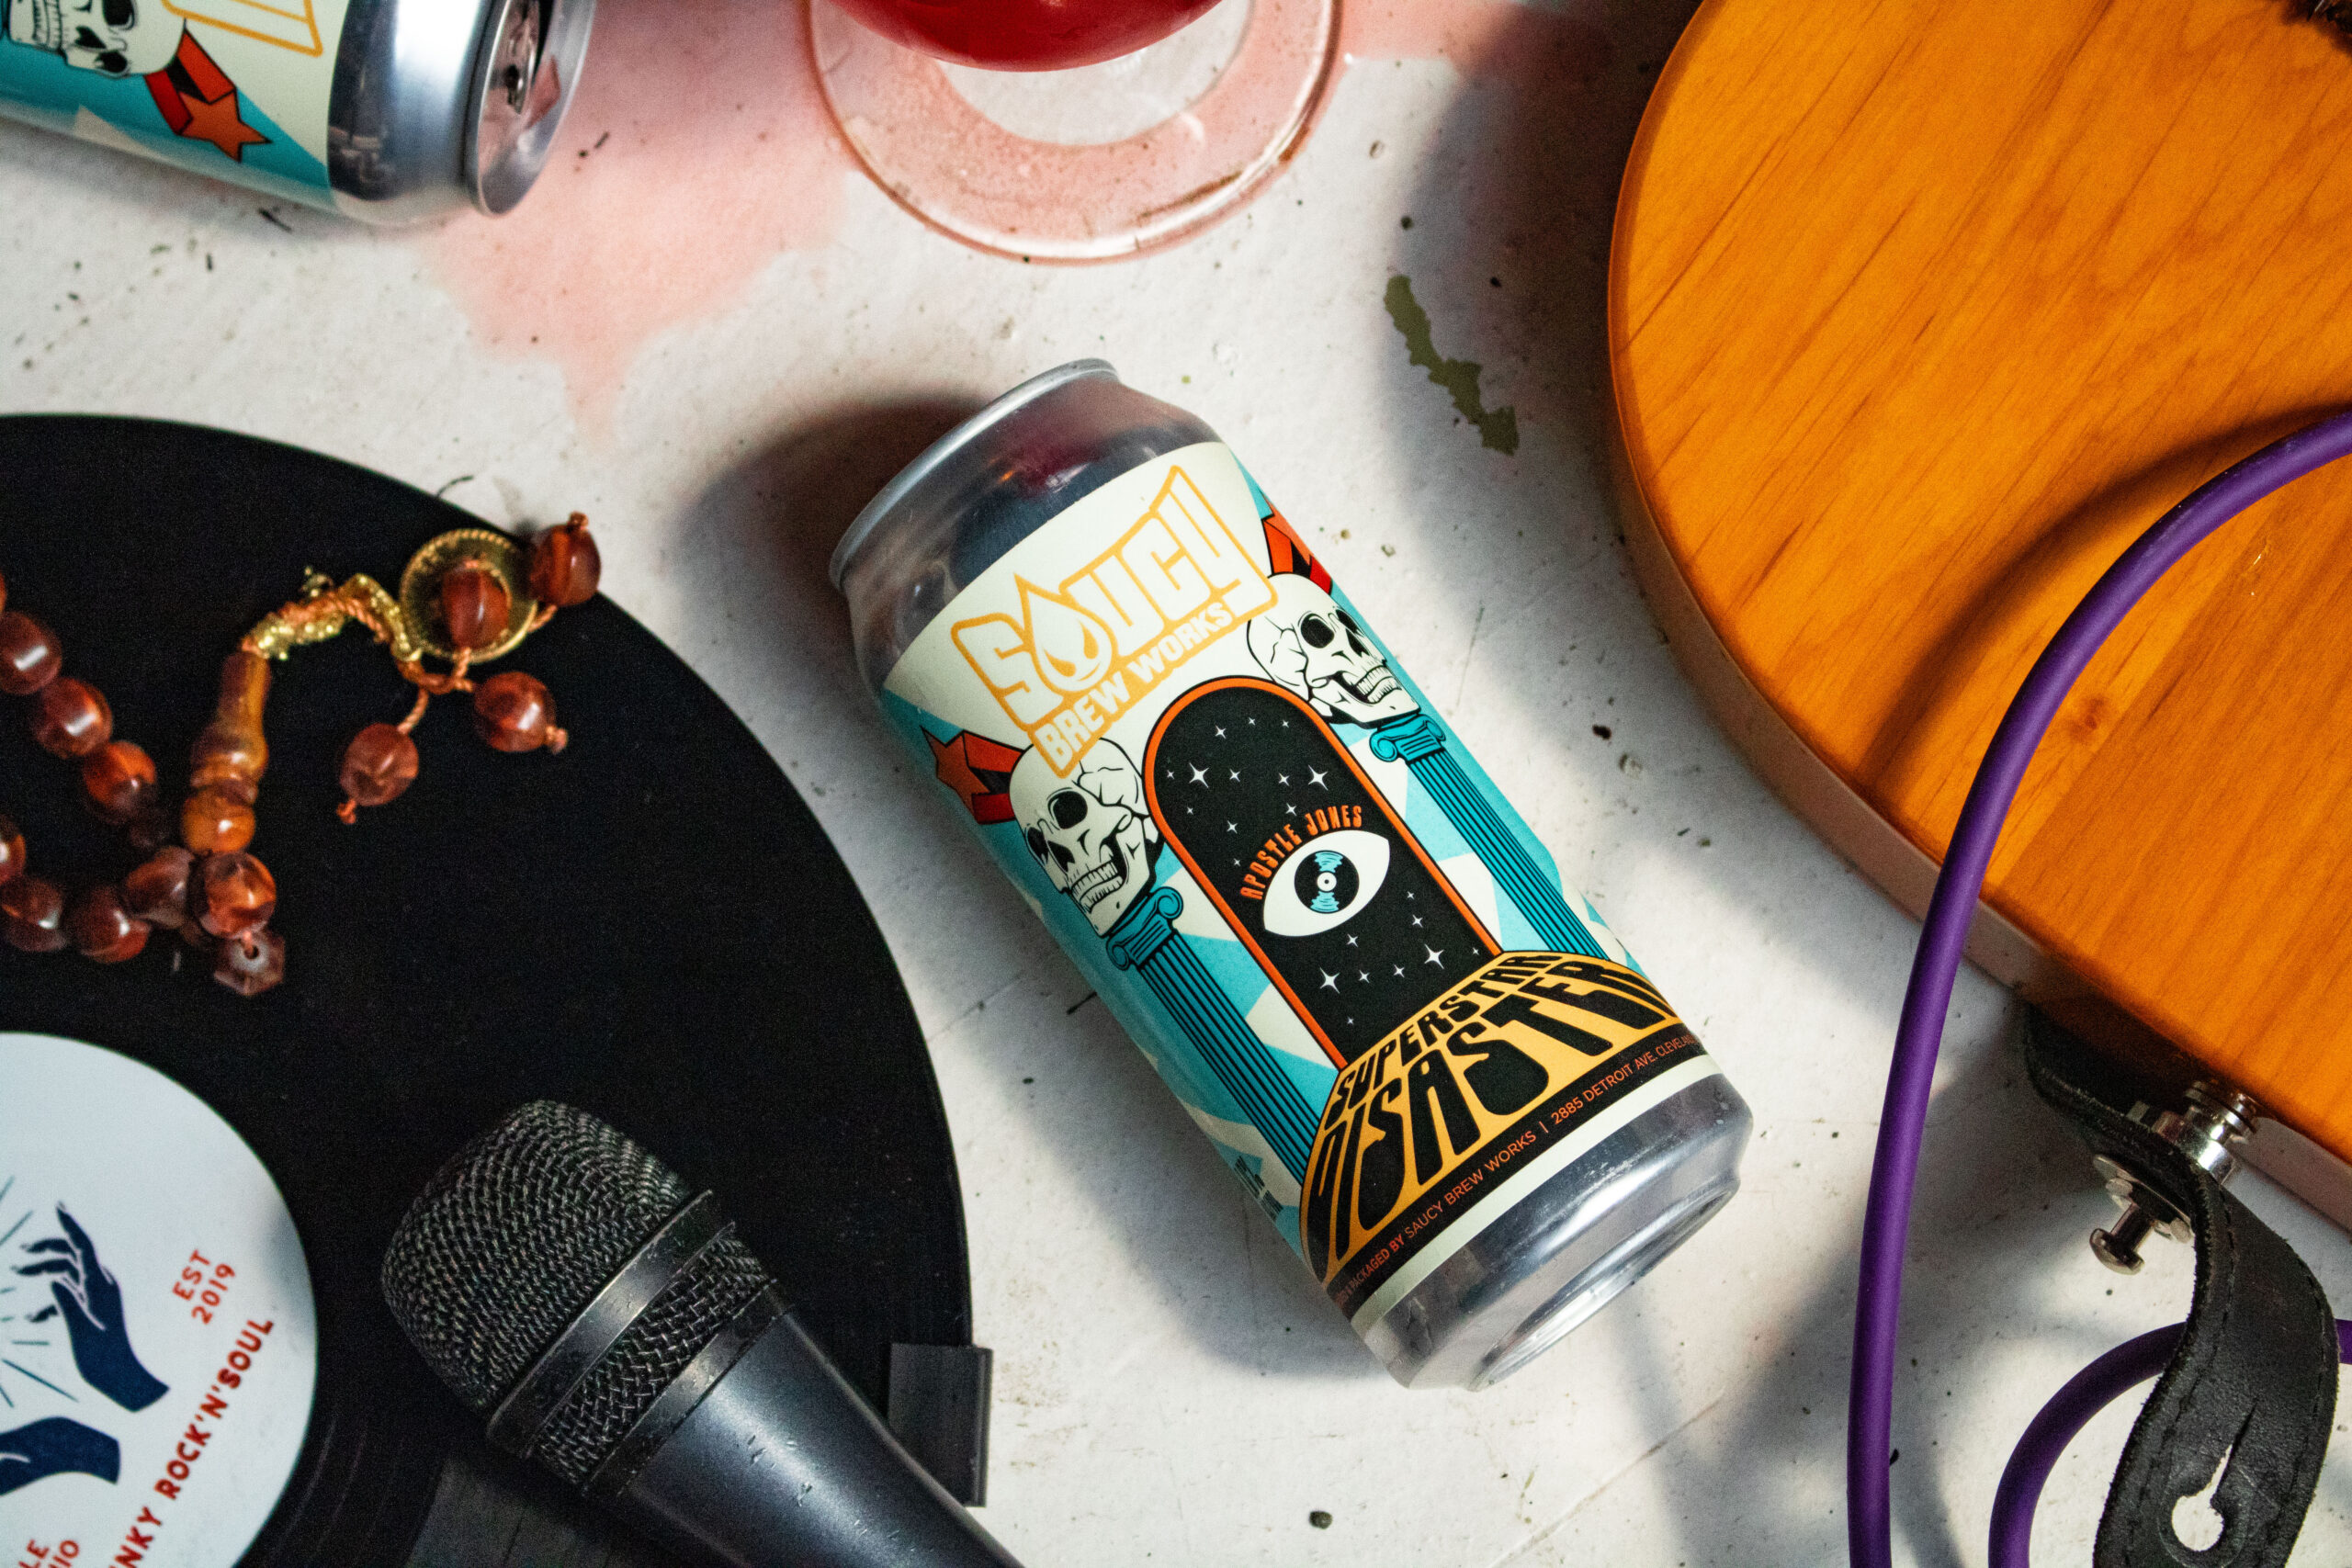 Beer can surrounded by spilled beer, a guitar, a microphone, and a record.